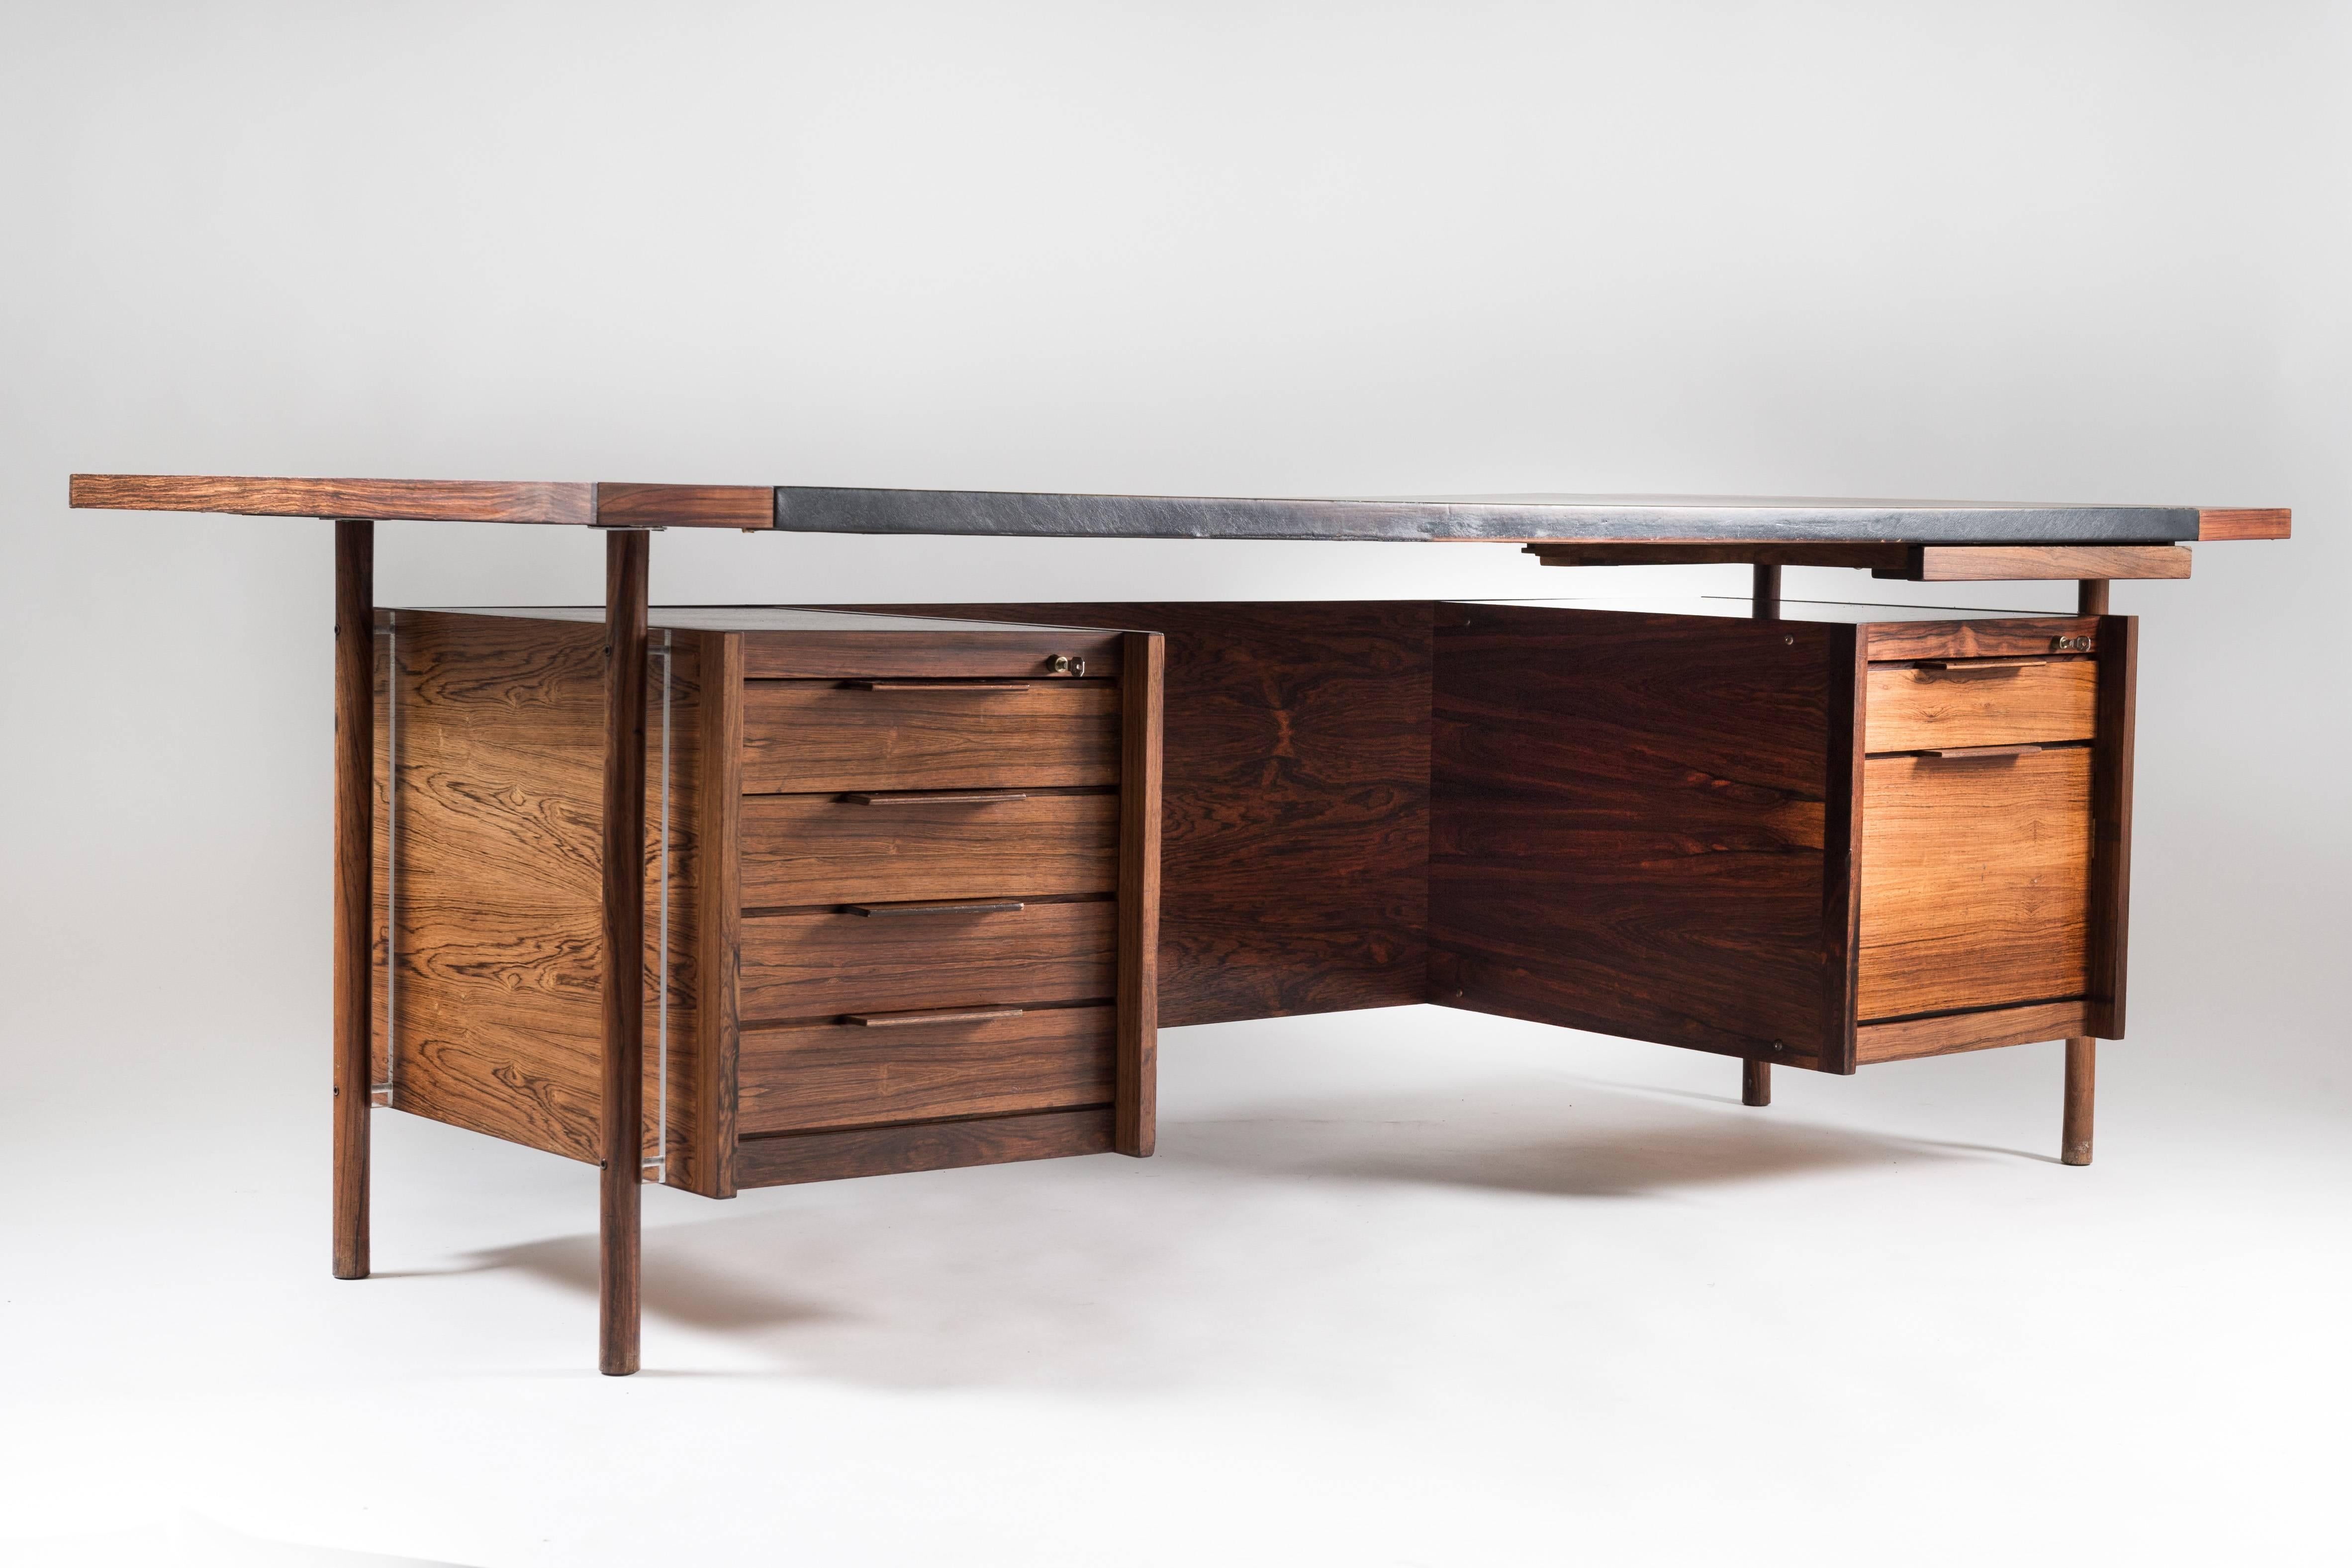 Amazing executive desk by Norwegian designer Sven Ivar Dysthe for Dokka Møbler. The desk features a frame made of rosewood and a tabletop of perfectly patinated leather. The legs, made of solid rosewood, support the drawers with a plexiglass